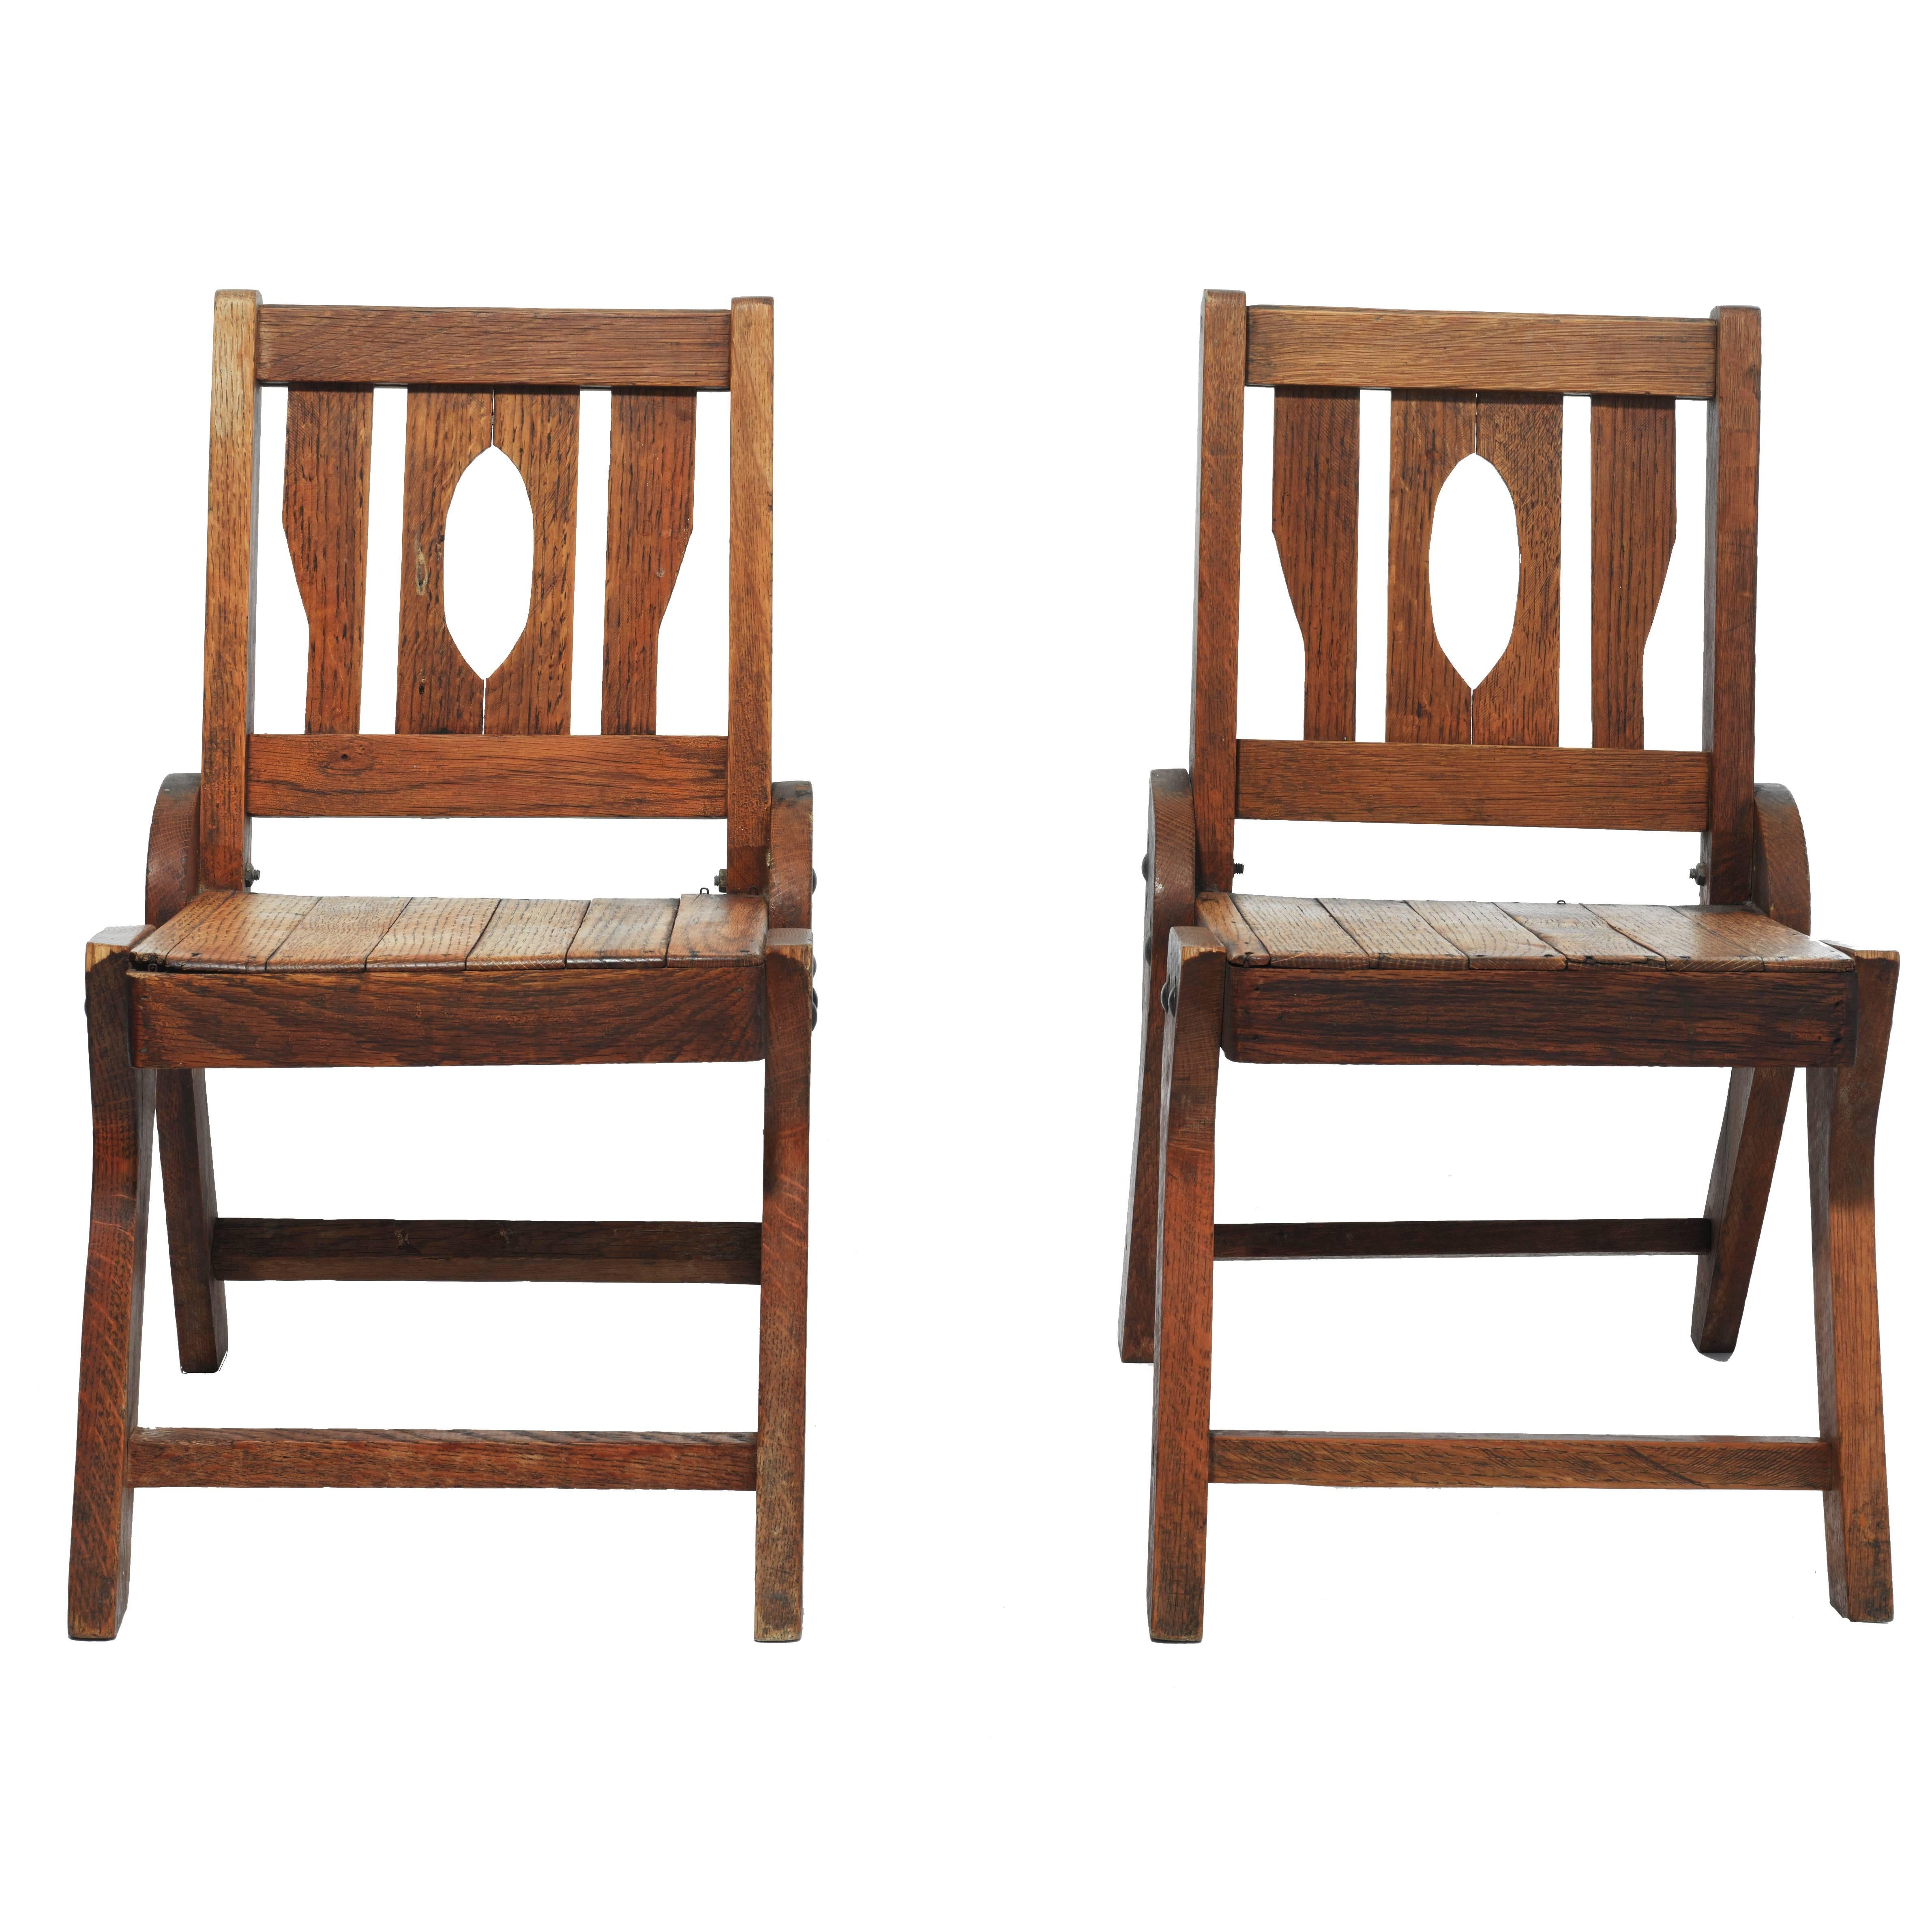 Pair of 1930s Wooden Colorado Chairs For Sale